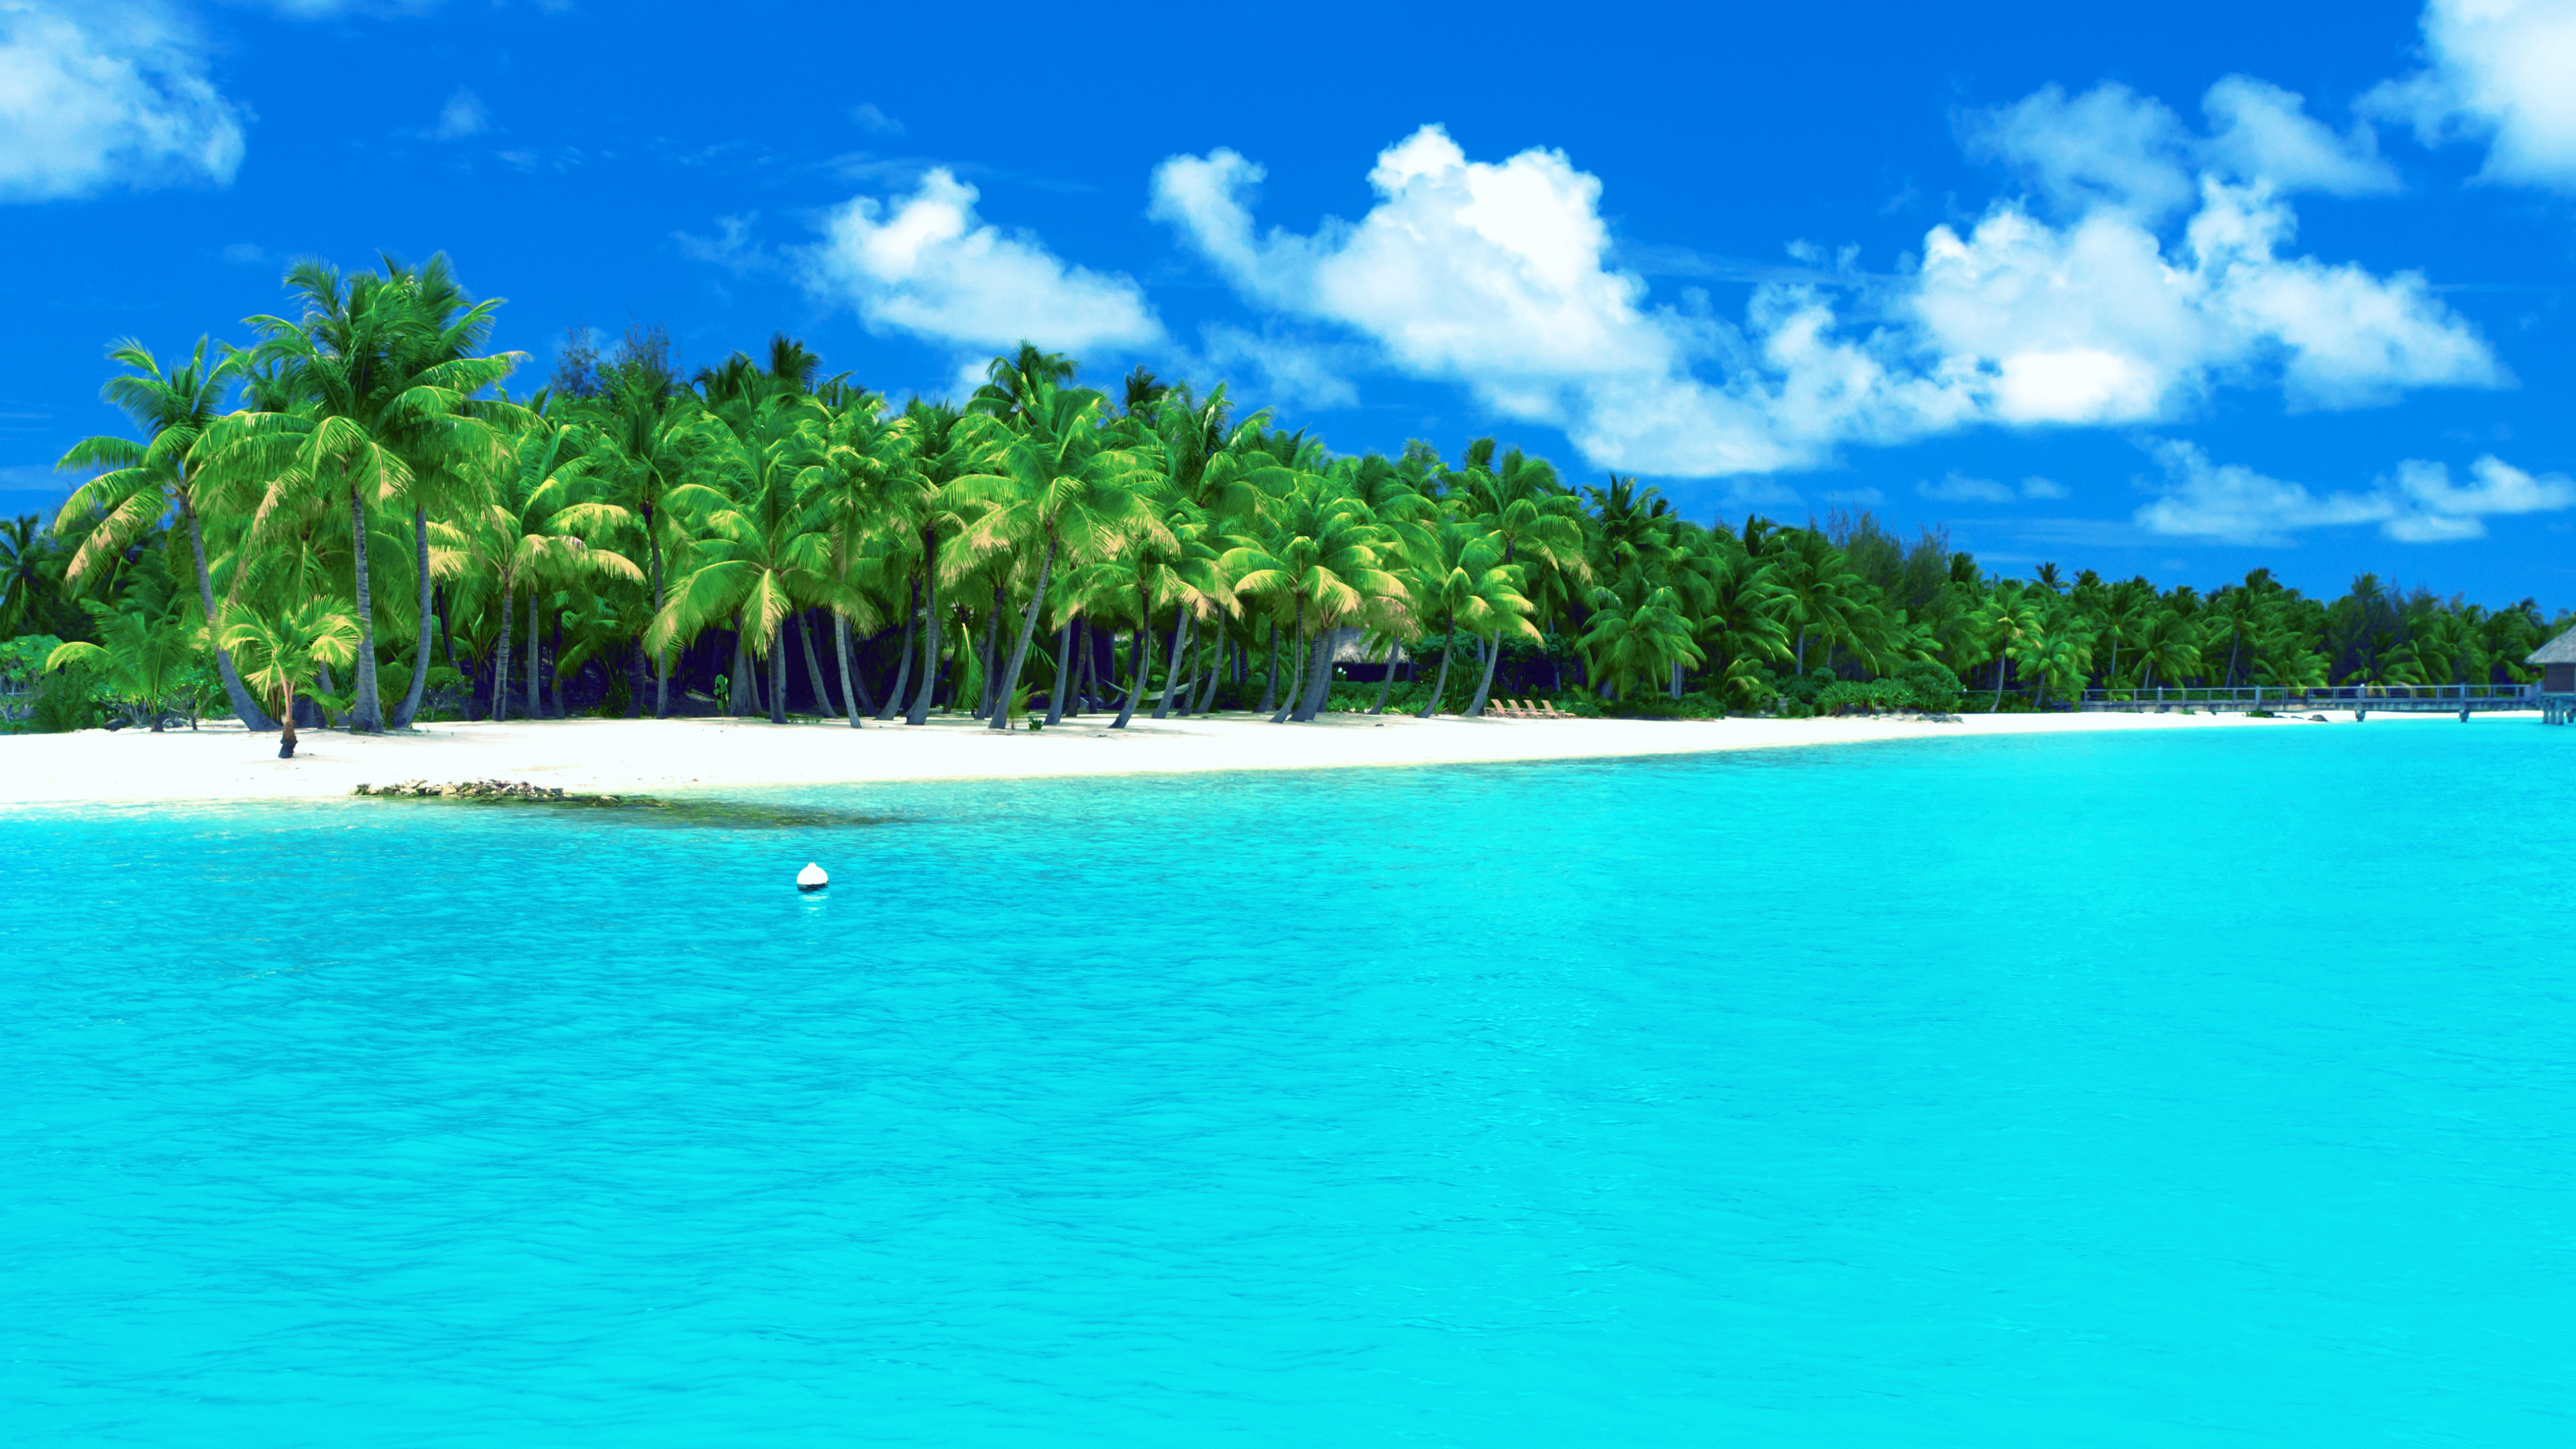 White Sand Beach With Palm Trees on The Side. Wallpaper in 3840x2160 Resolution